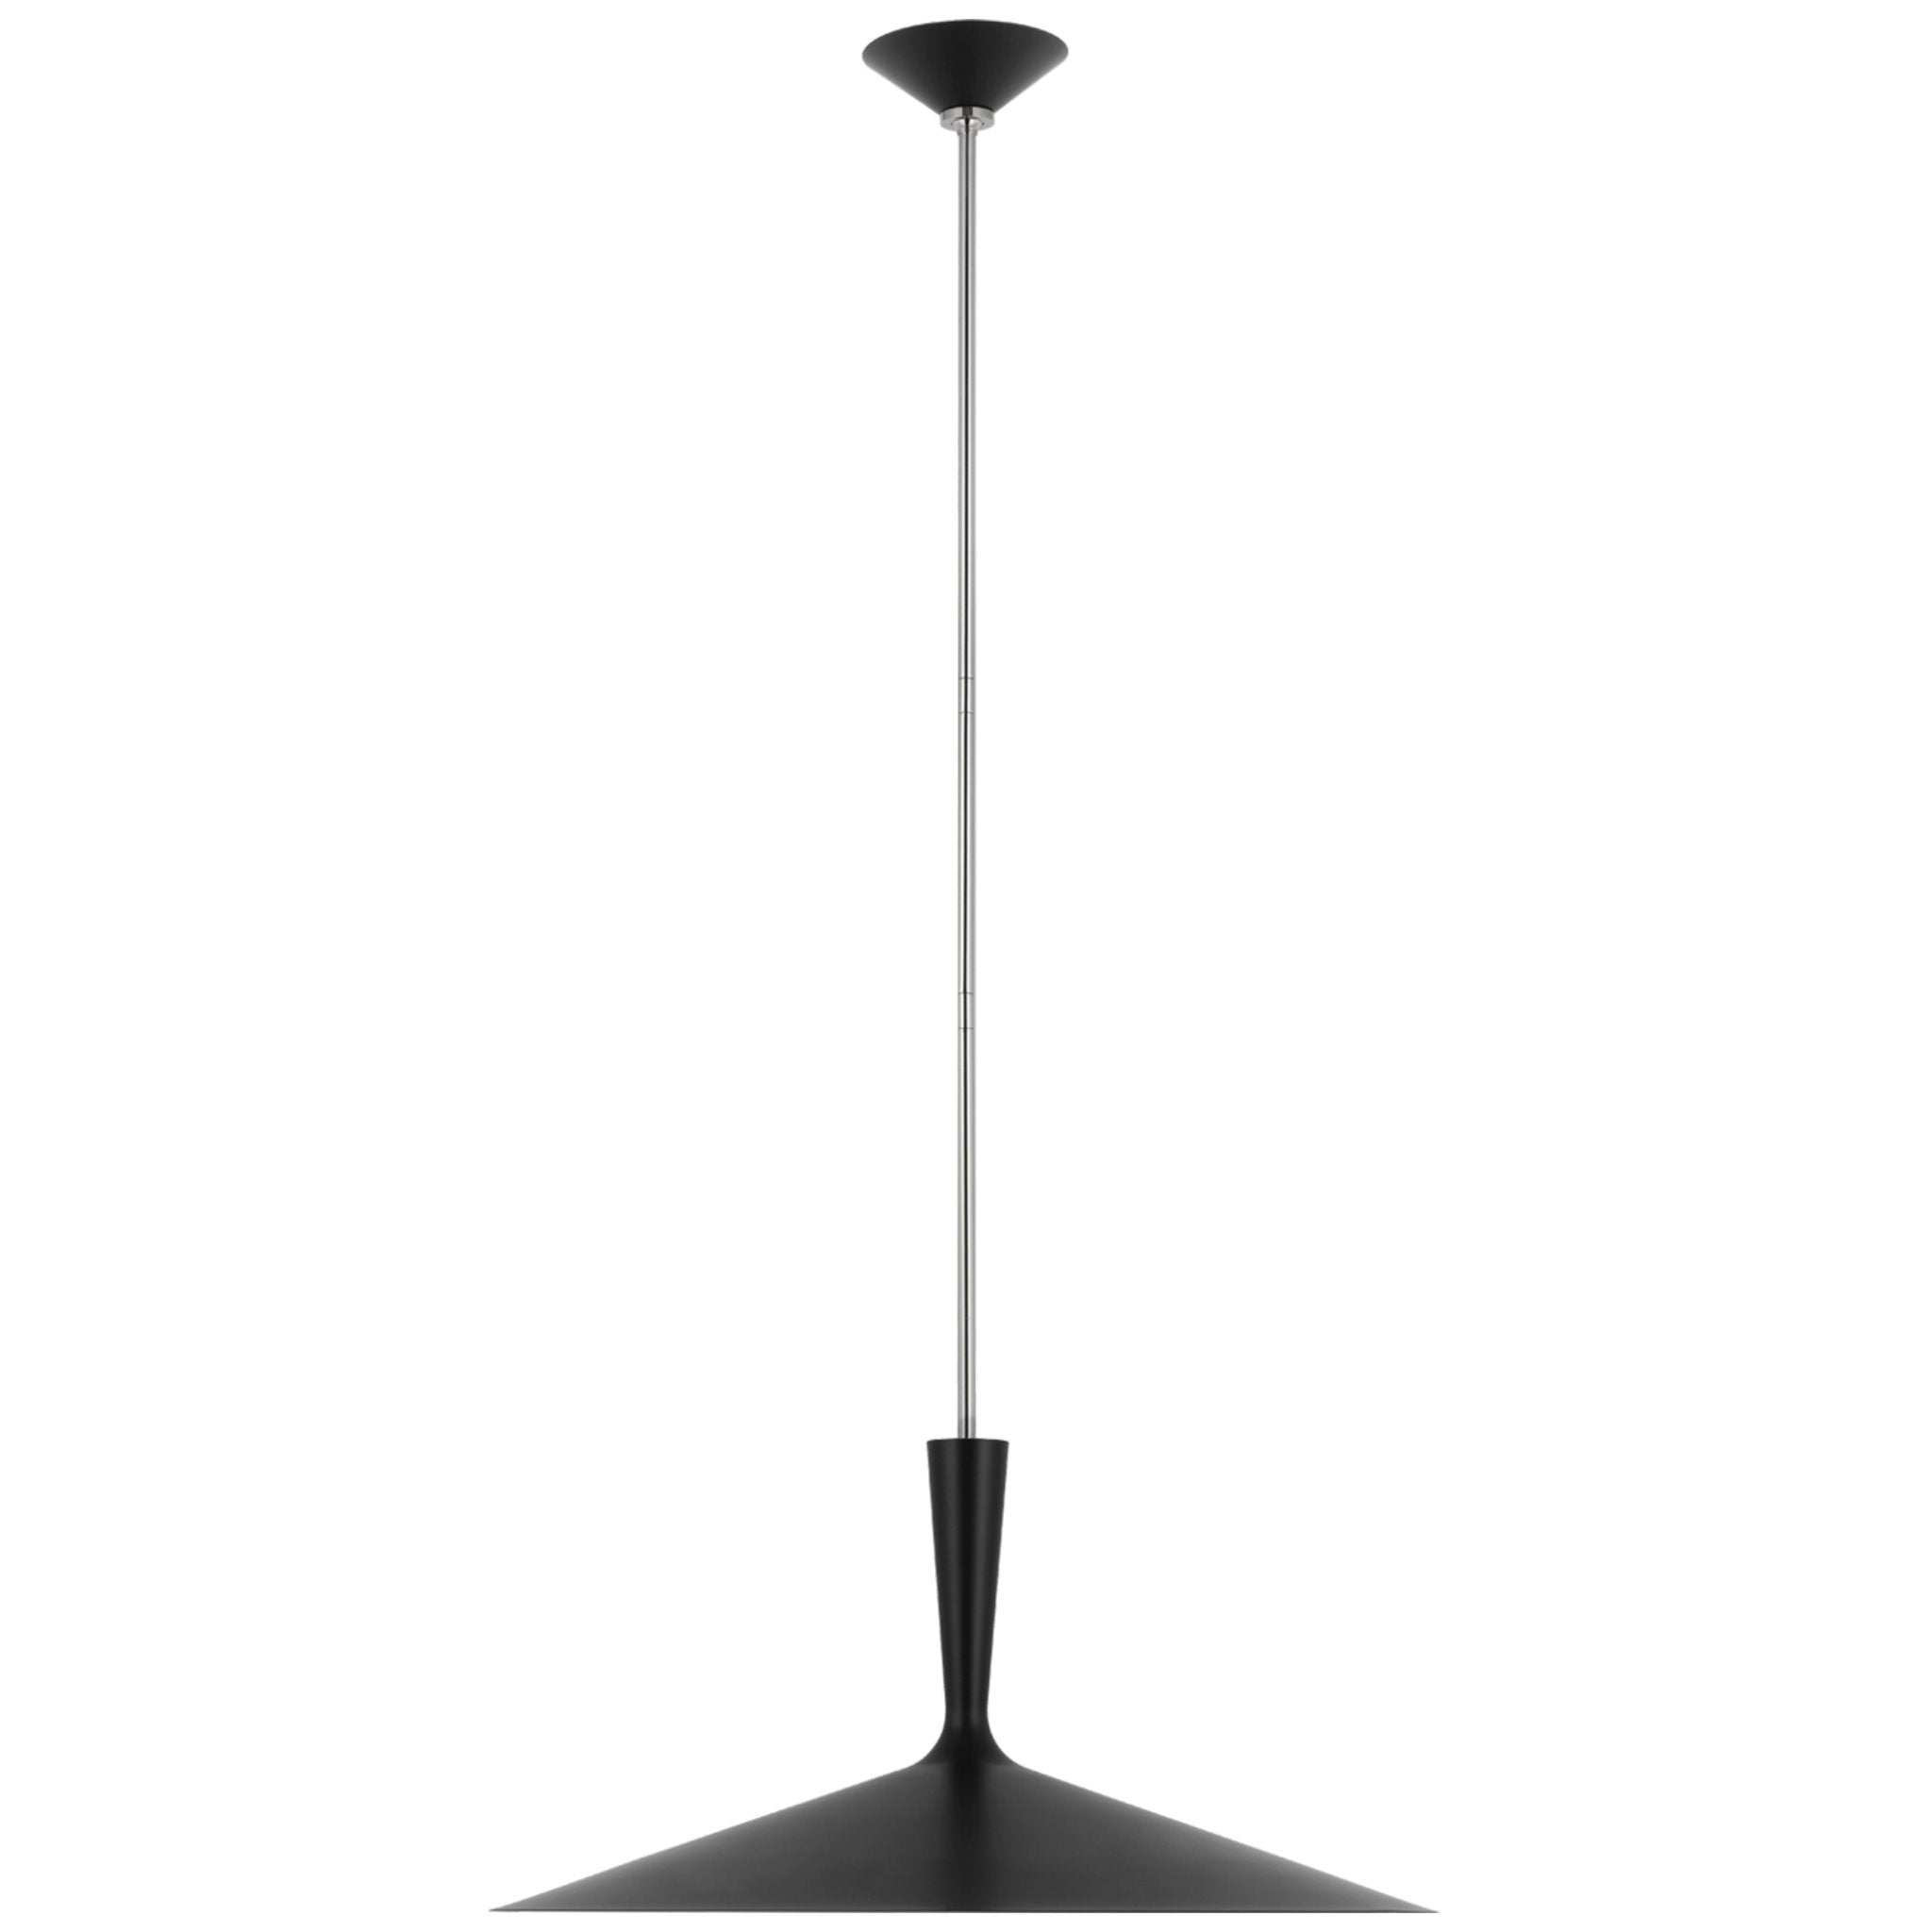 AERIN Rosetta XL Pendant in Matte Black and Polished Nickel